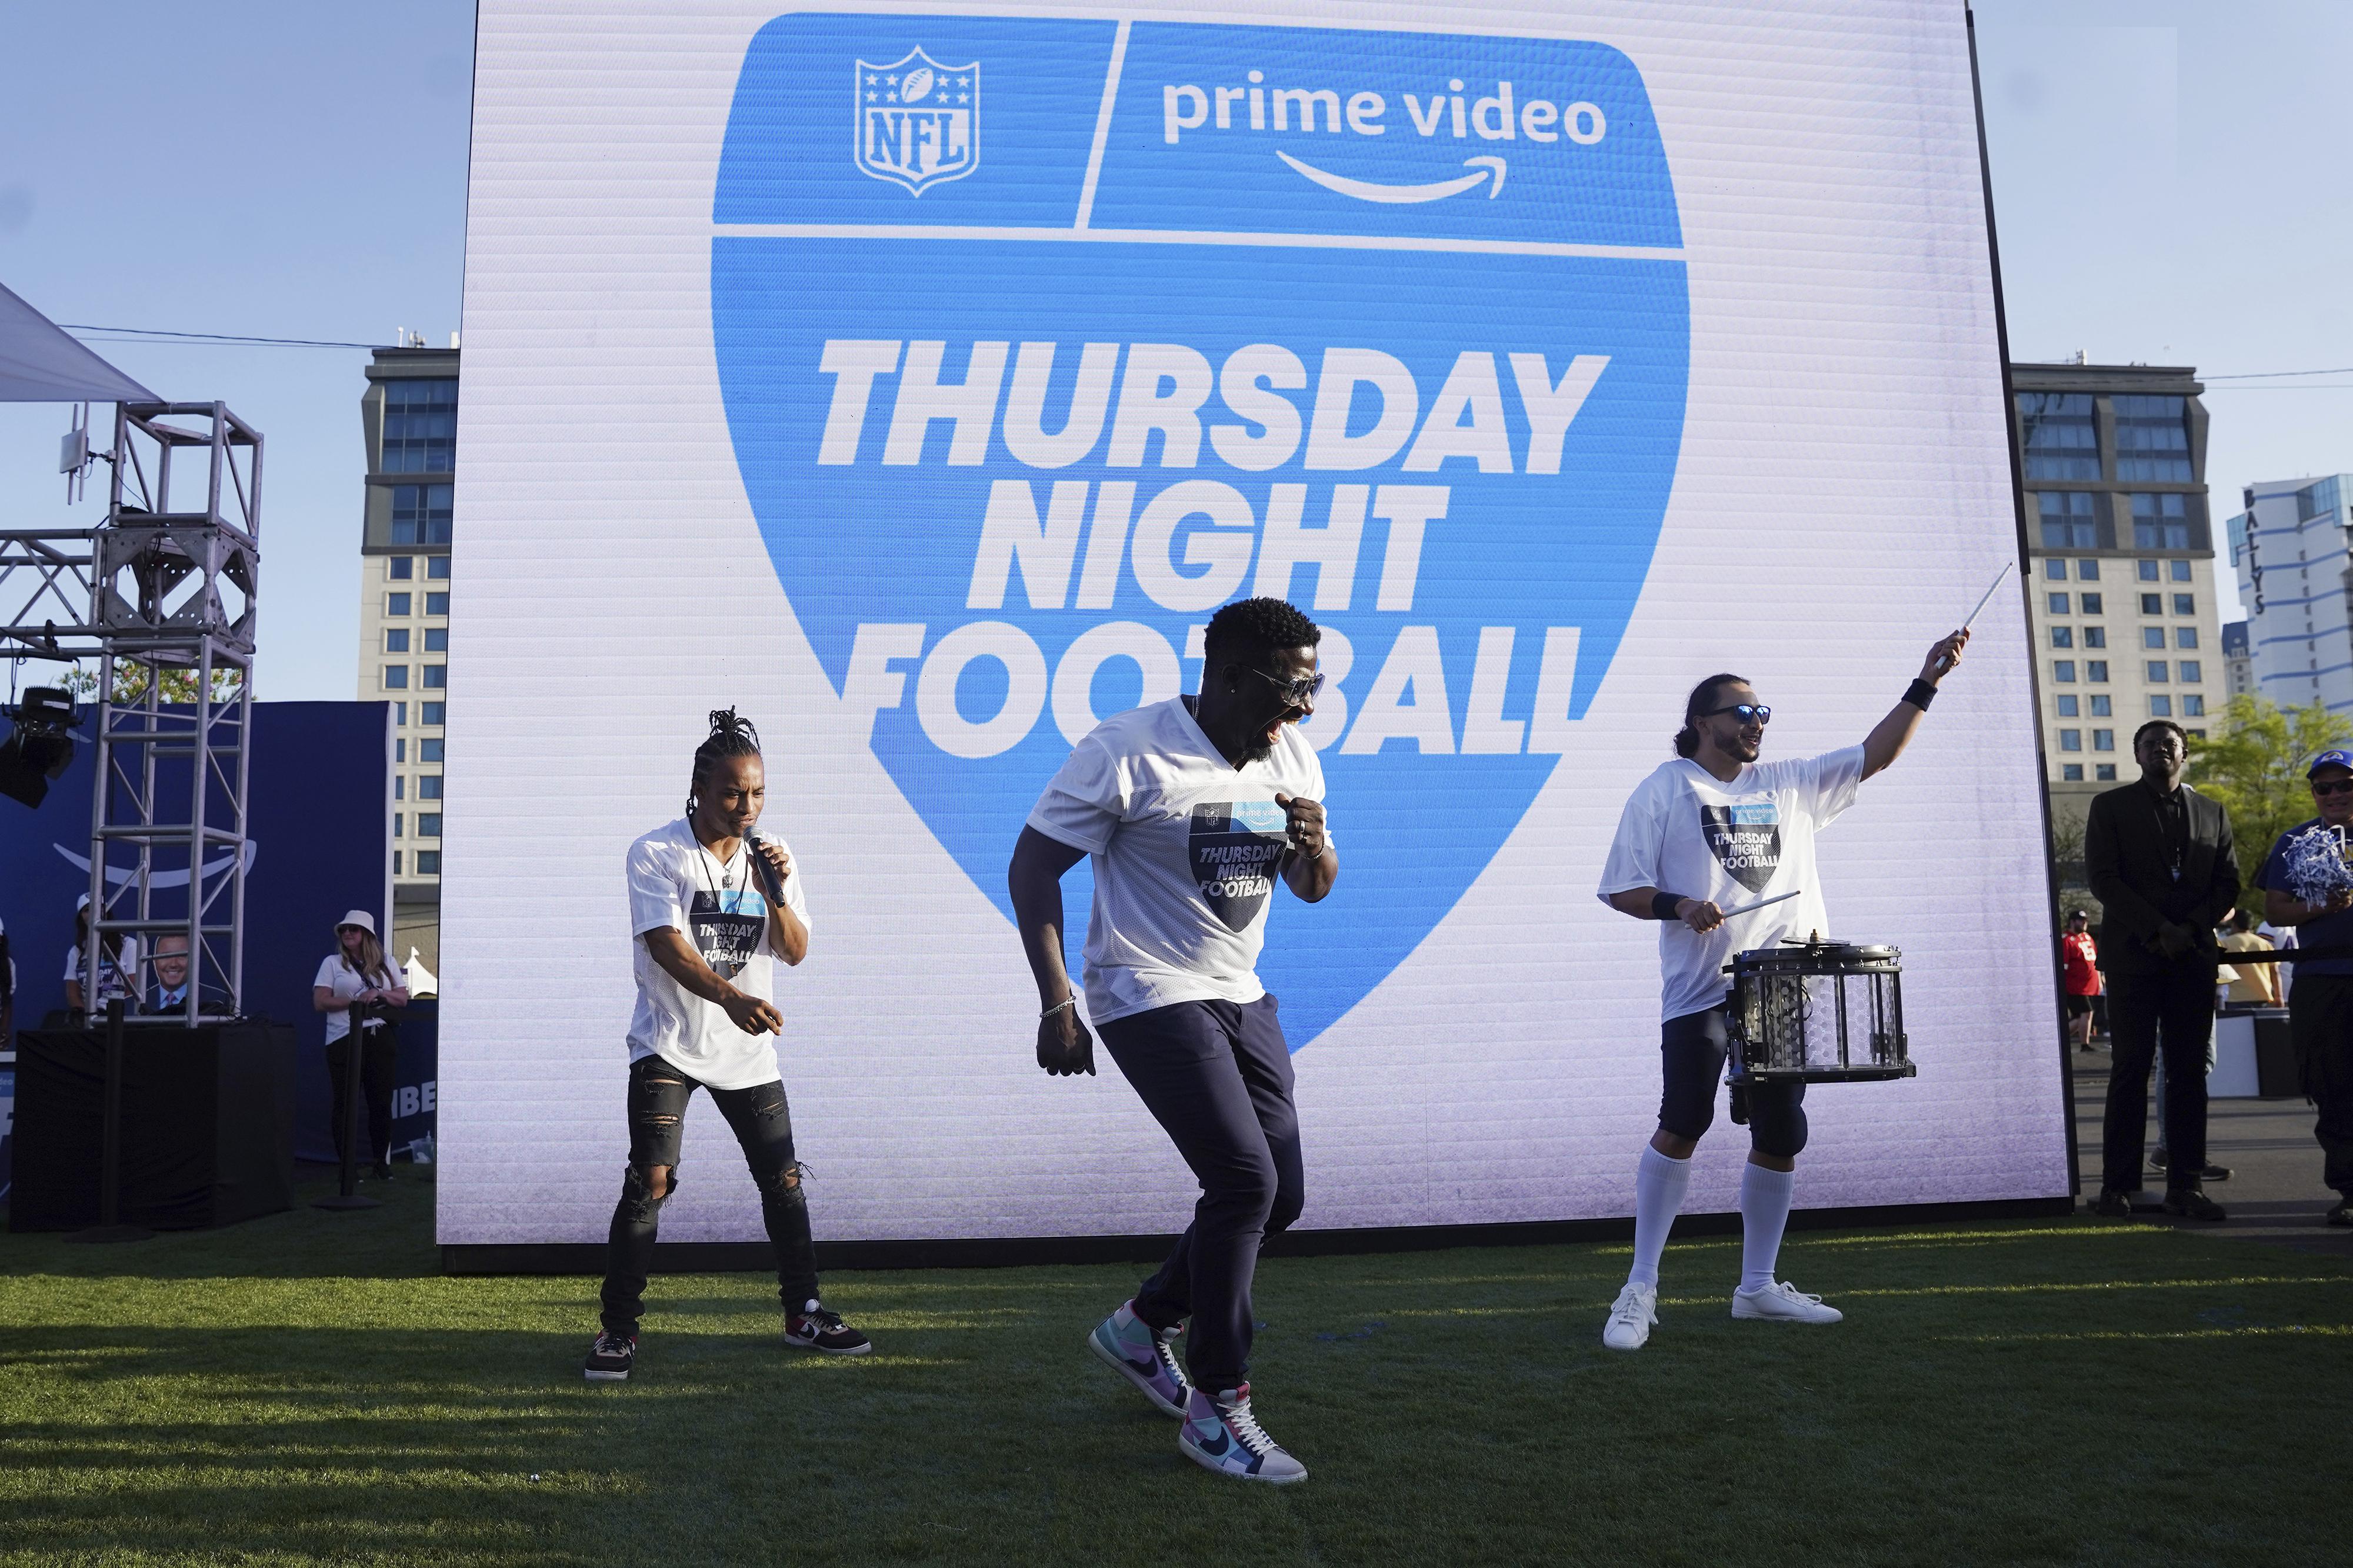 A new NFL era begins for Thursday night football broadcasts with  :  NPR